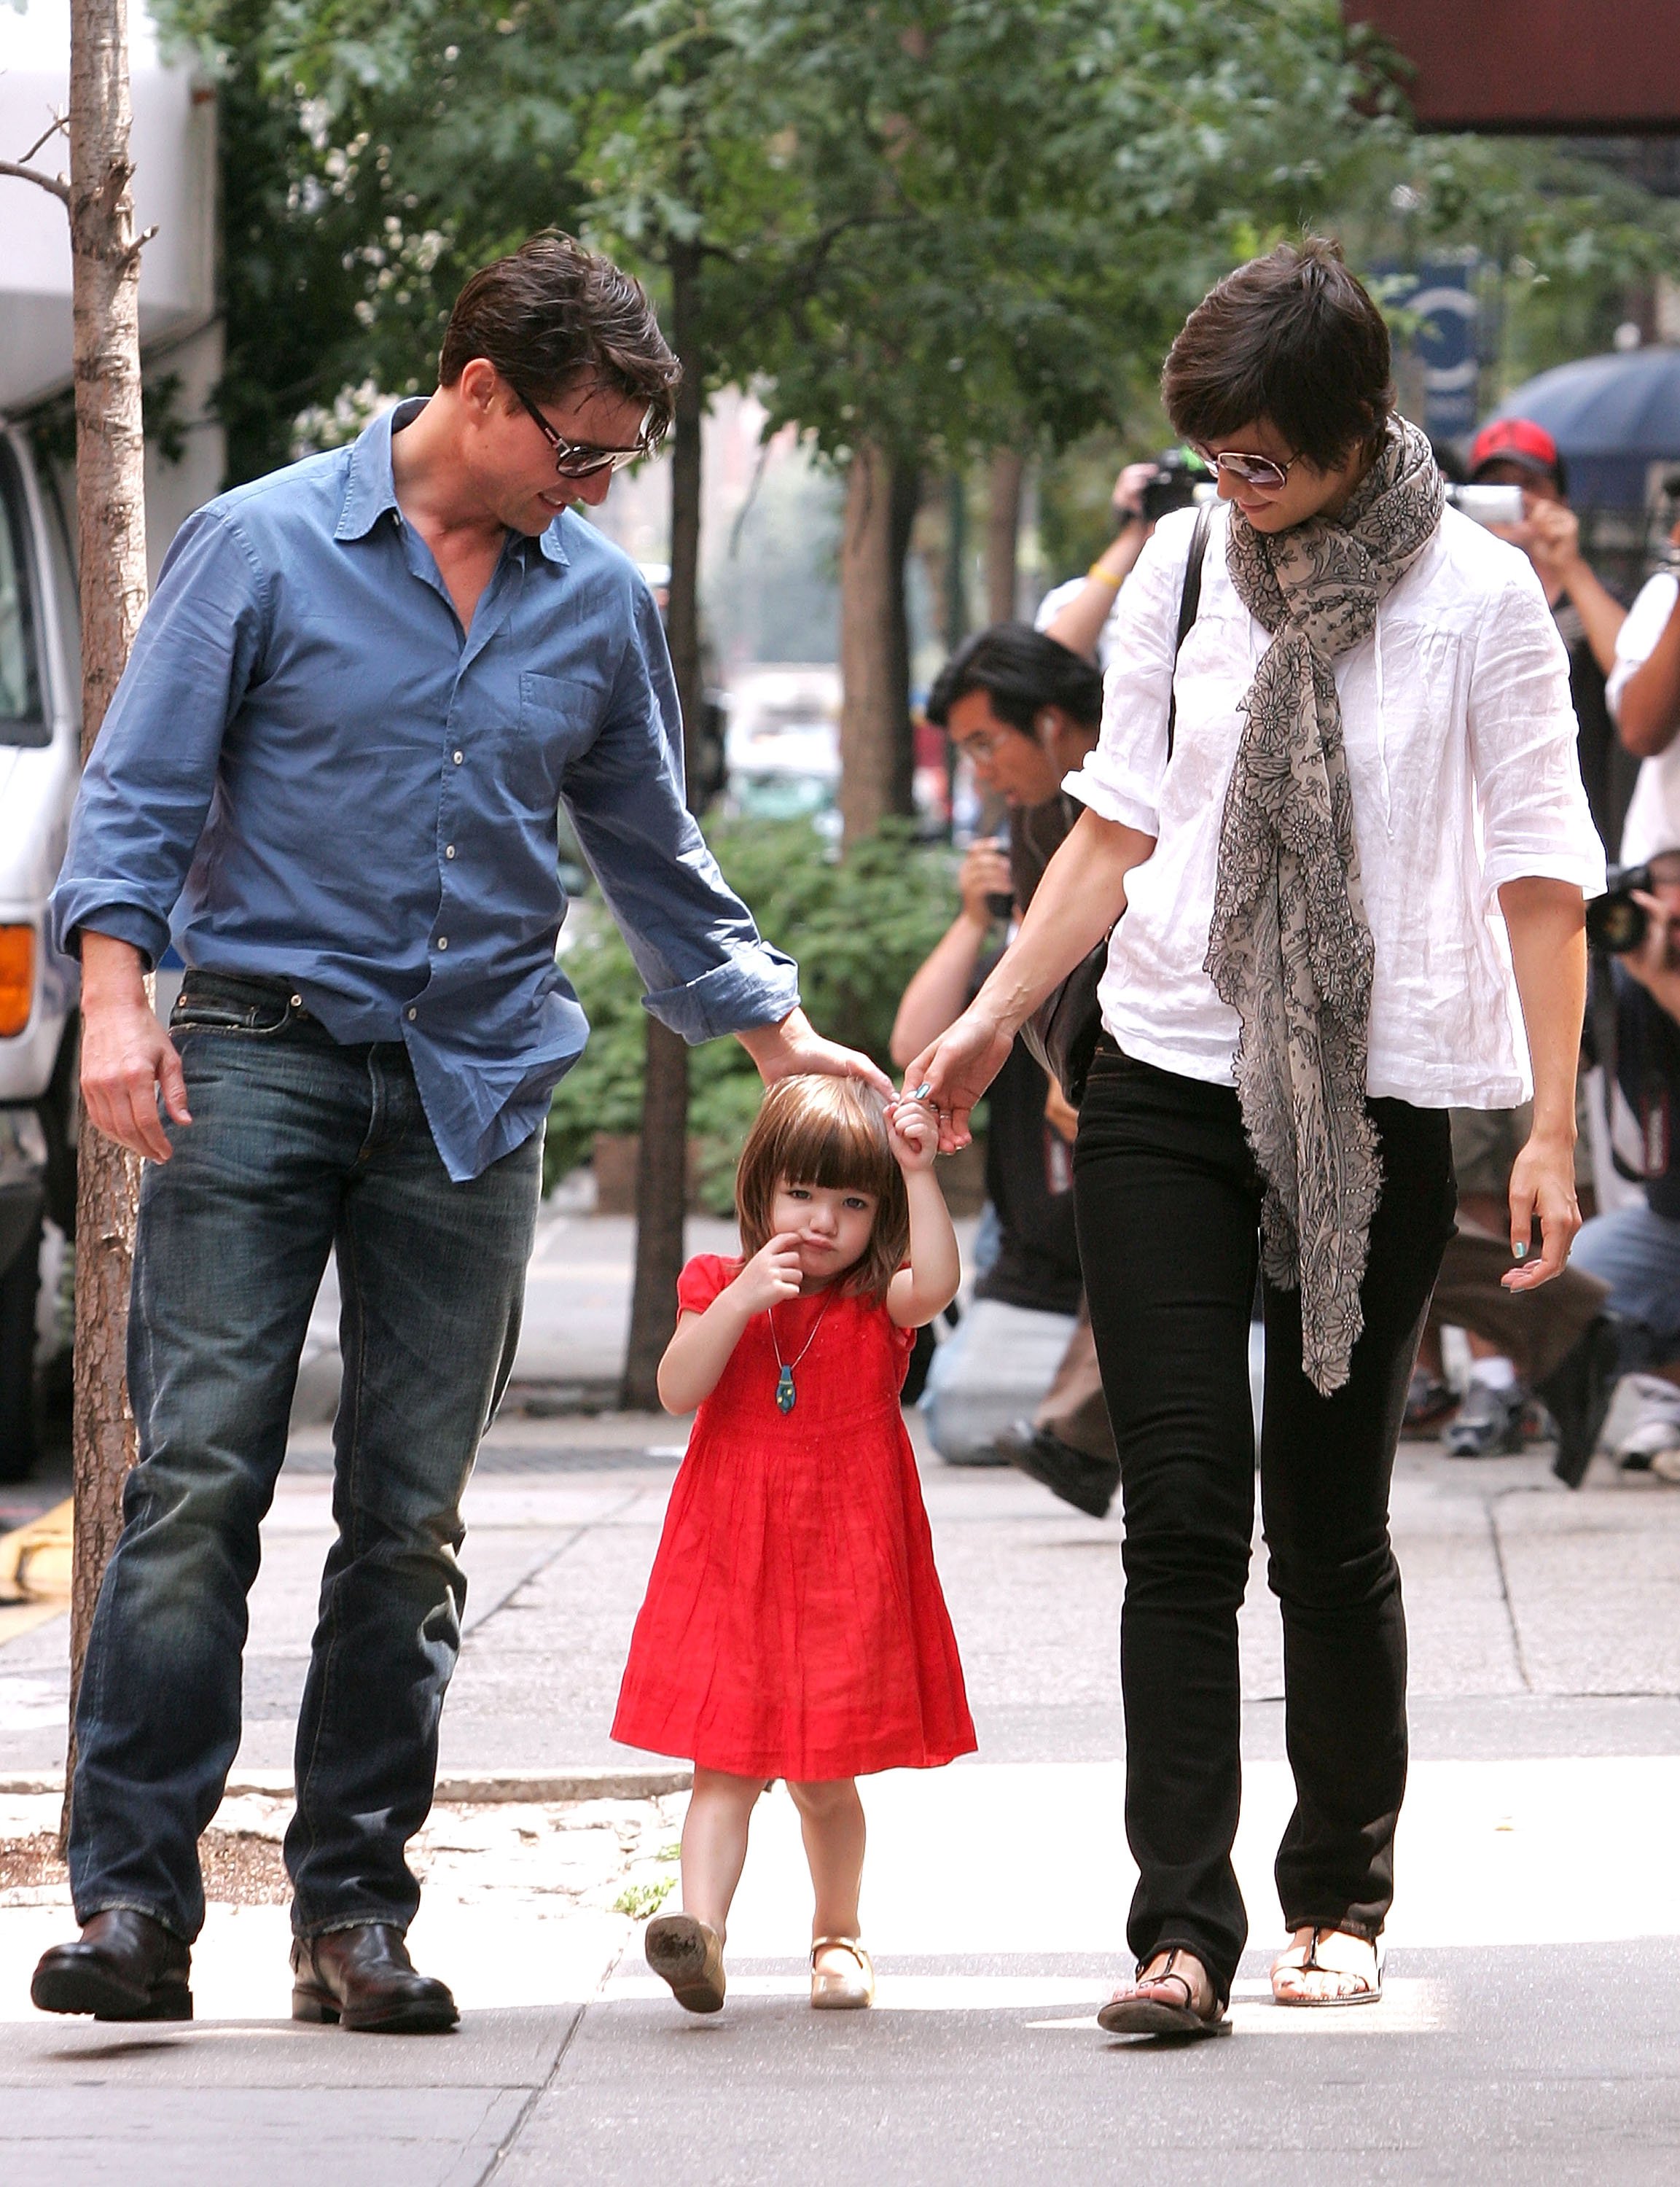 Tom Cruise, Suri Cruise, and Katie Holmes seen in Manhattan, New York on August 15, 2008 | Source: Getty Images